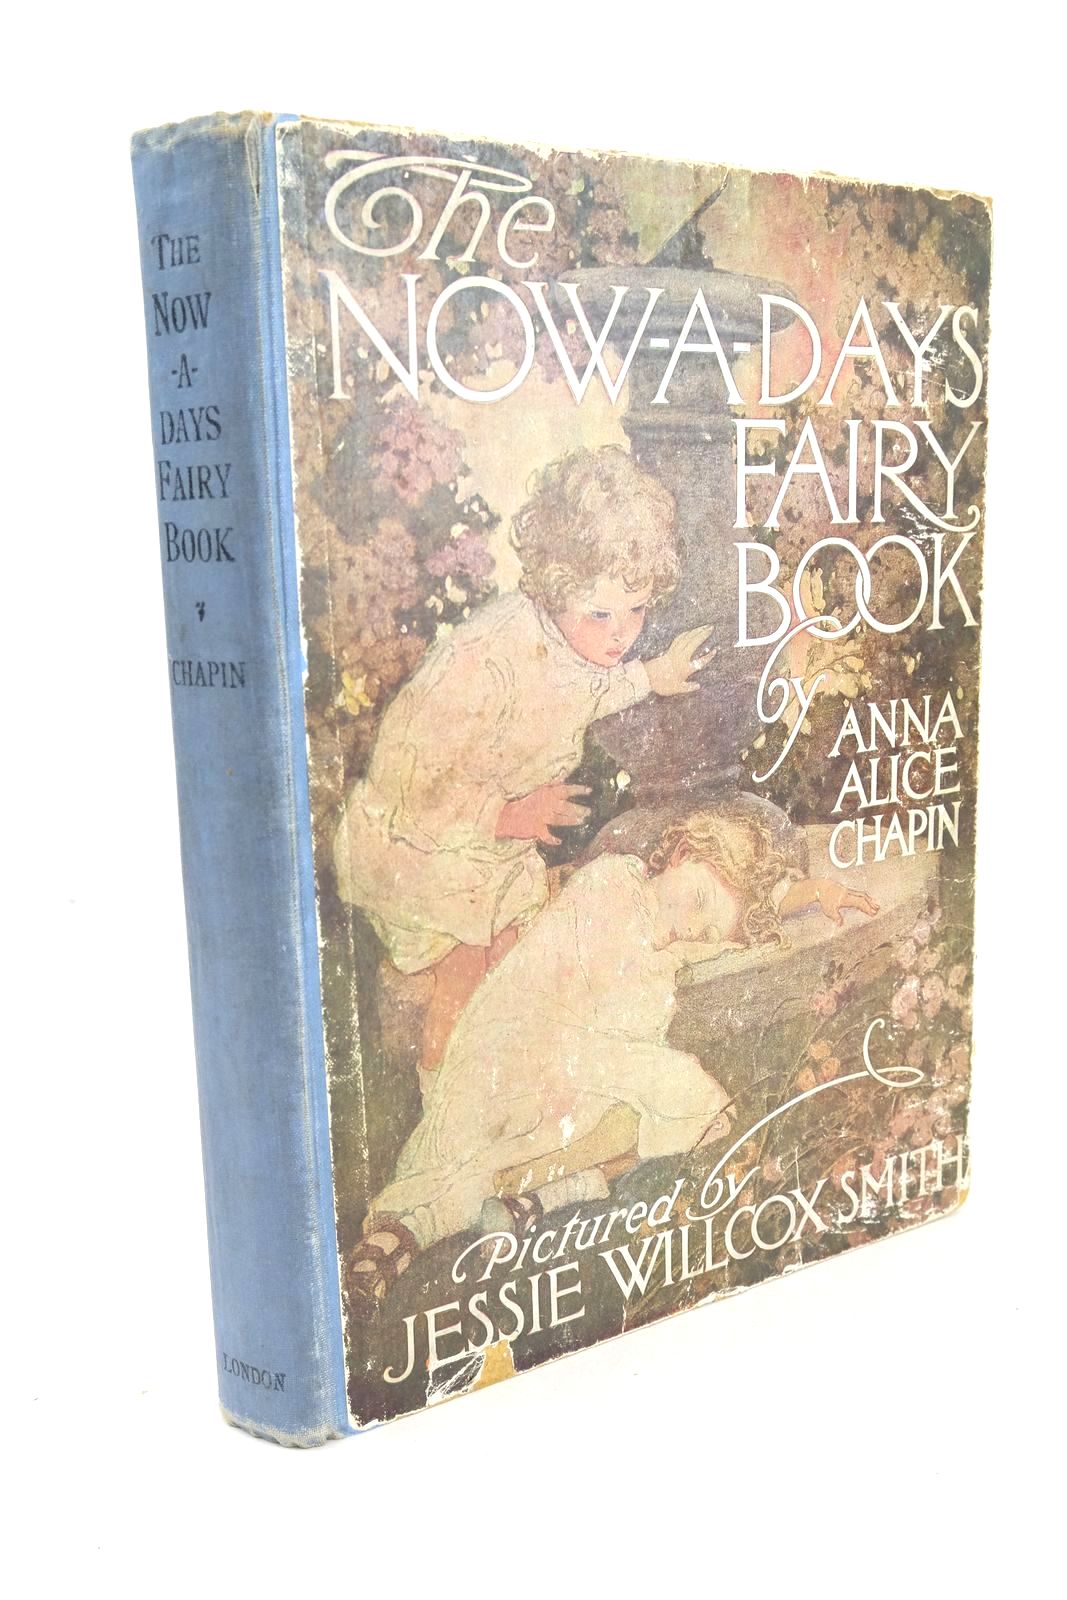 Photo of THE NOW-A-DAYS FAIRY BOOK written by Chapin, Anna Alice illustrated by Smith, Jessie Willcox published by J. Coker &amp; Co. Ltd. (STOCK CODE: 1325994)  for sale by Stella & Rose's Books